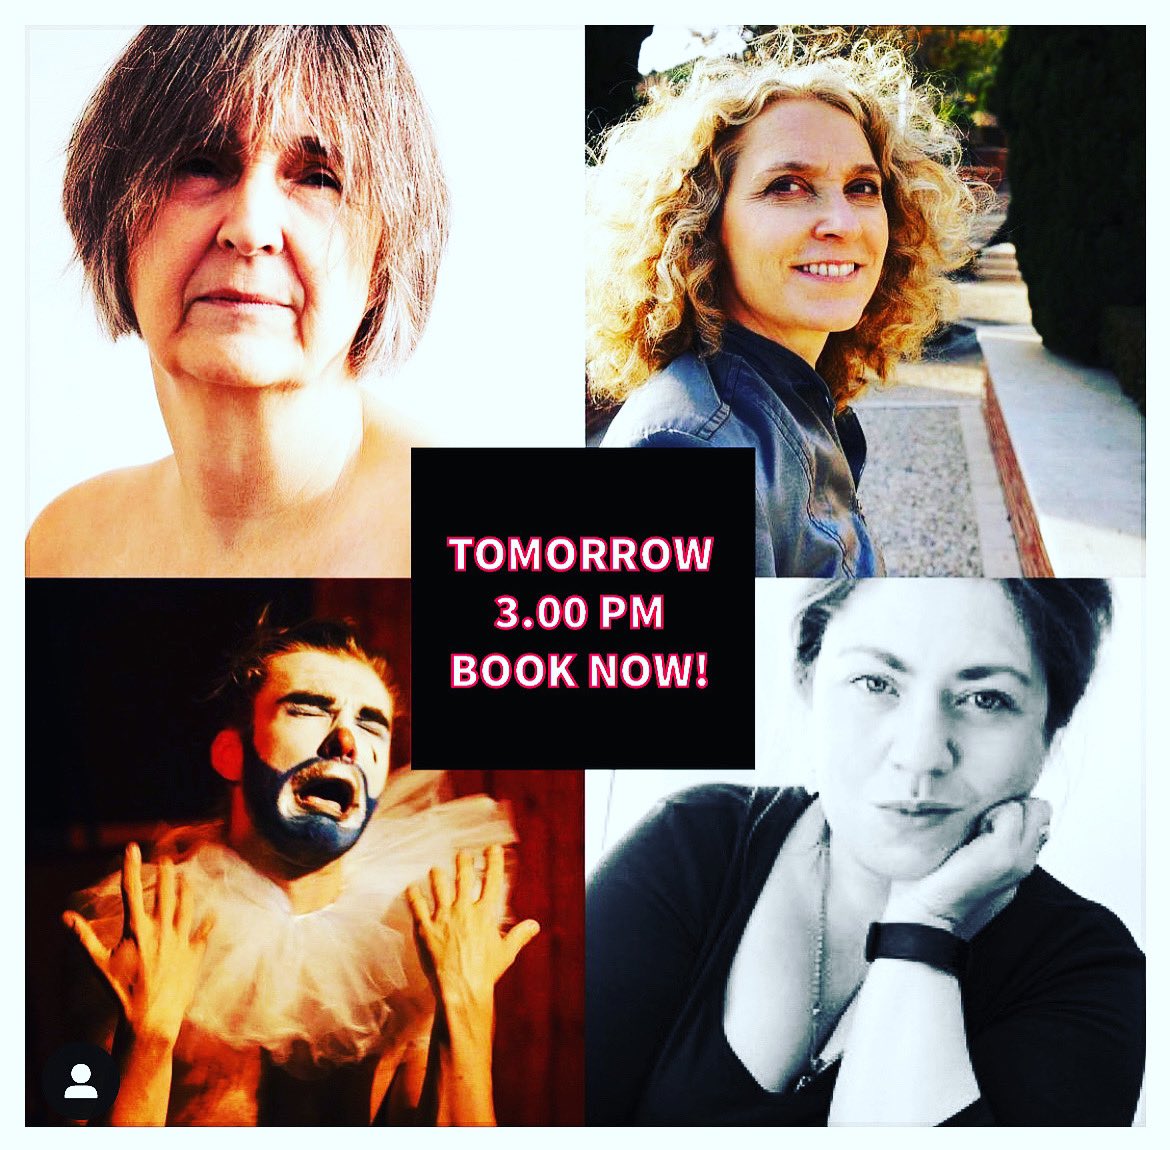 TOMORROW @PoetryAldeburgh present ‘Poetry and Trauma’ featuring the incredible 
Alice Hiller, Chaucer Cameron, Day Mattar & me.
Join us on Saturday 6th Nov at 4pm on zoom. Book your pay-as-you-feel ticket here poetryinaldeburgh.org/festival-progr…
#poetryinaldeburgh
#poetryfestival